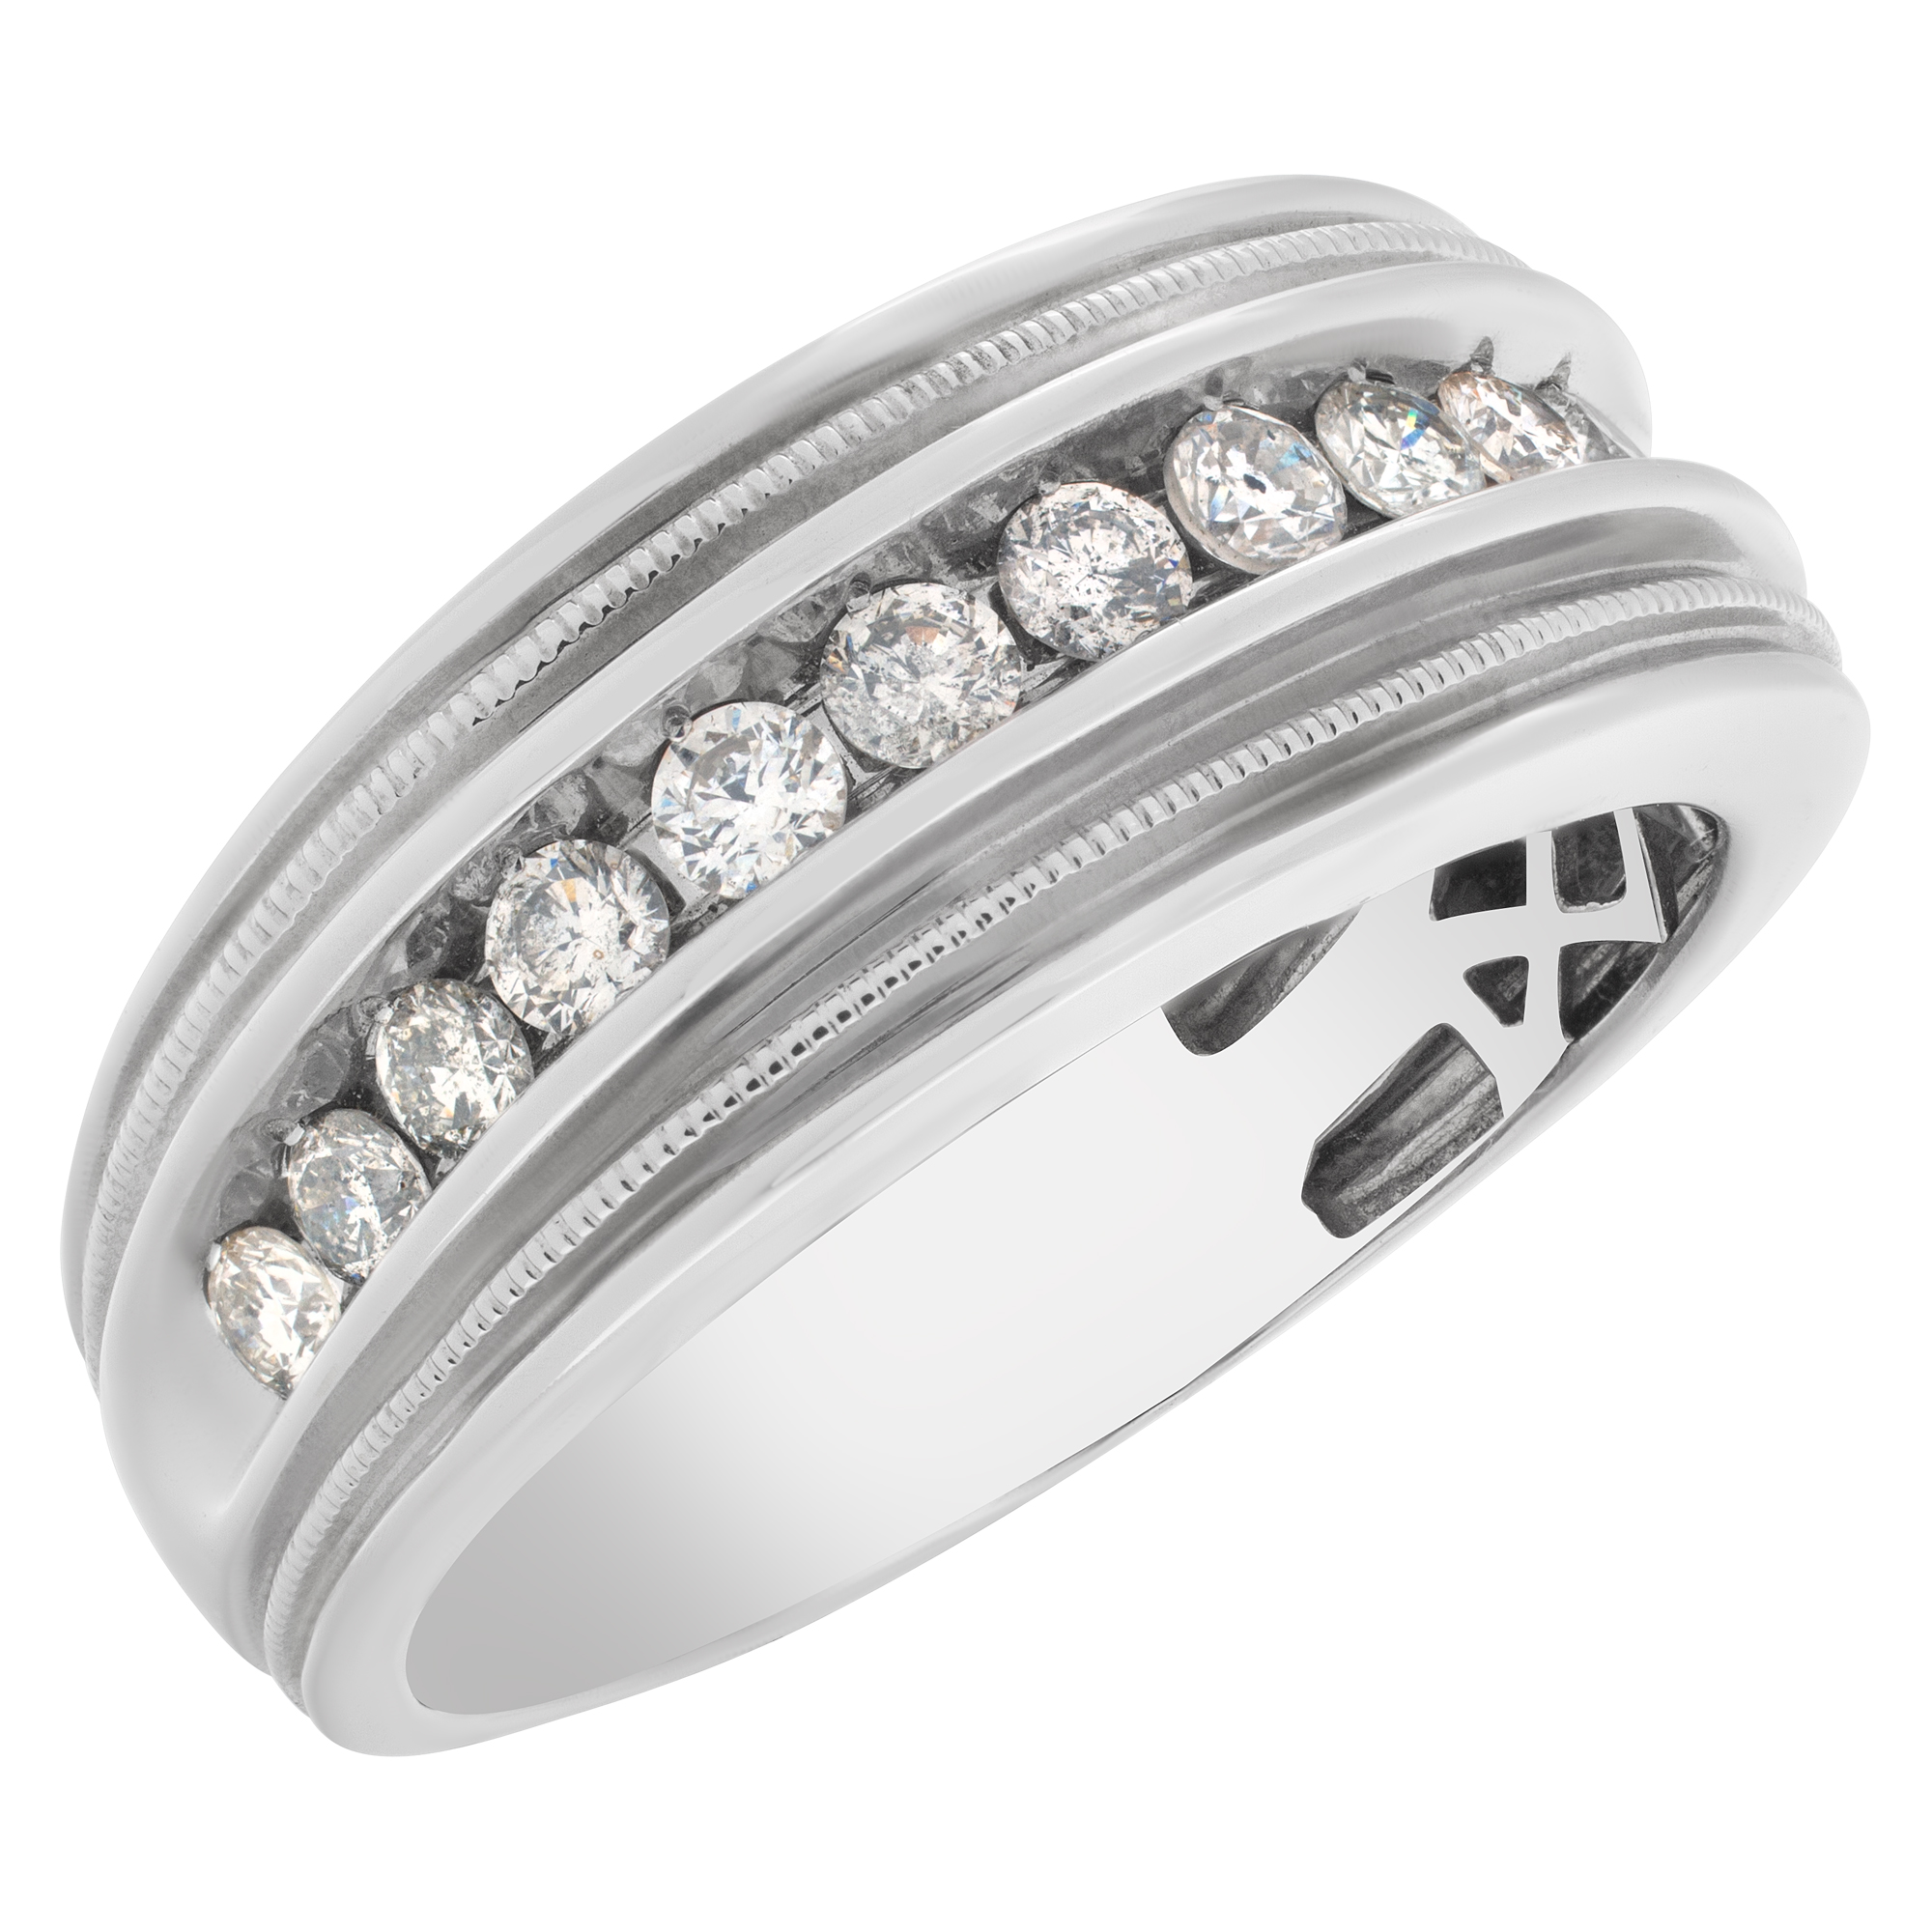 Diamond ring in 14k white gold with approx. 1 carat full cut round brilliant diamonds. (Stones) image 3